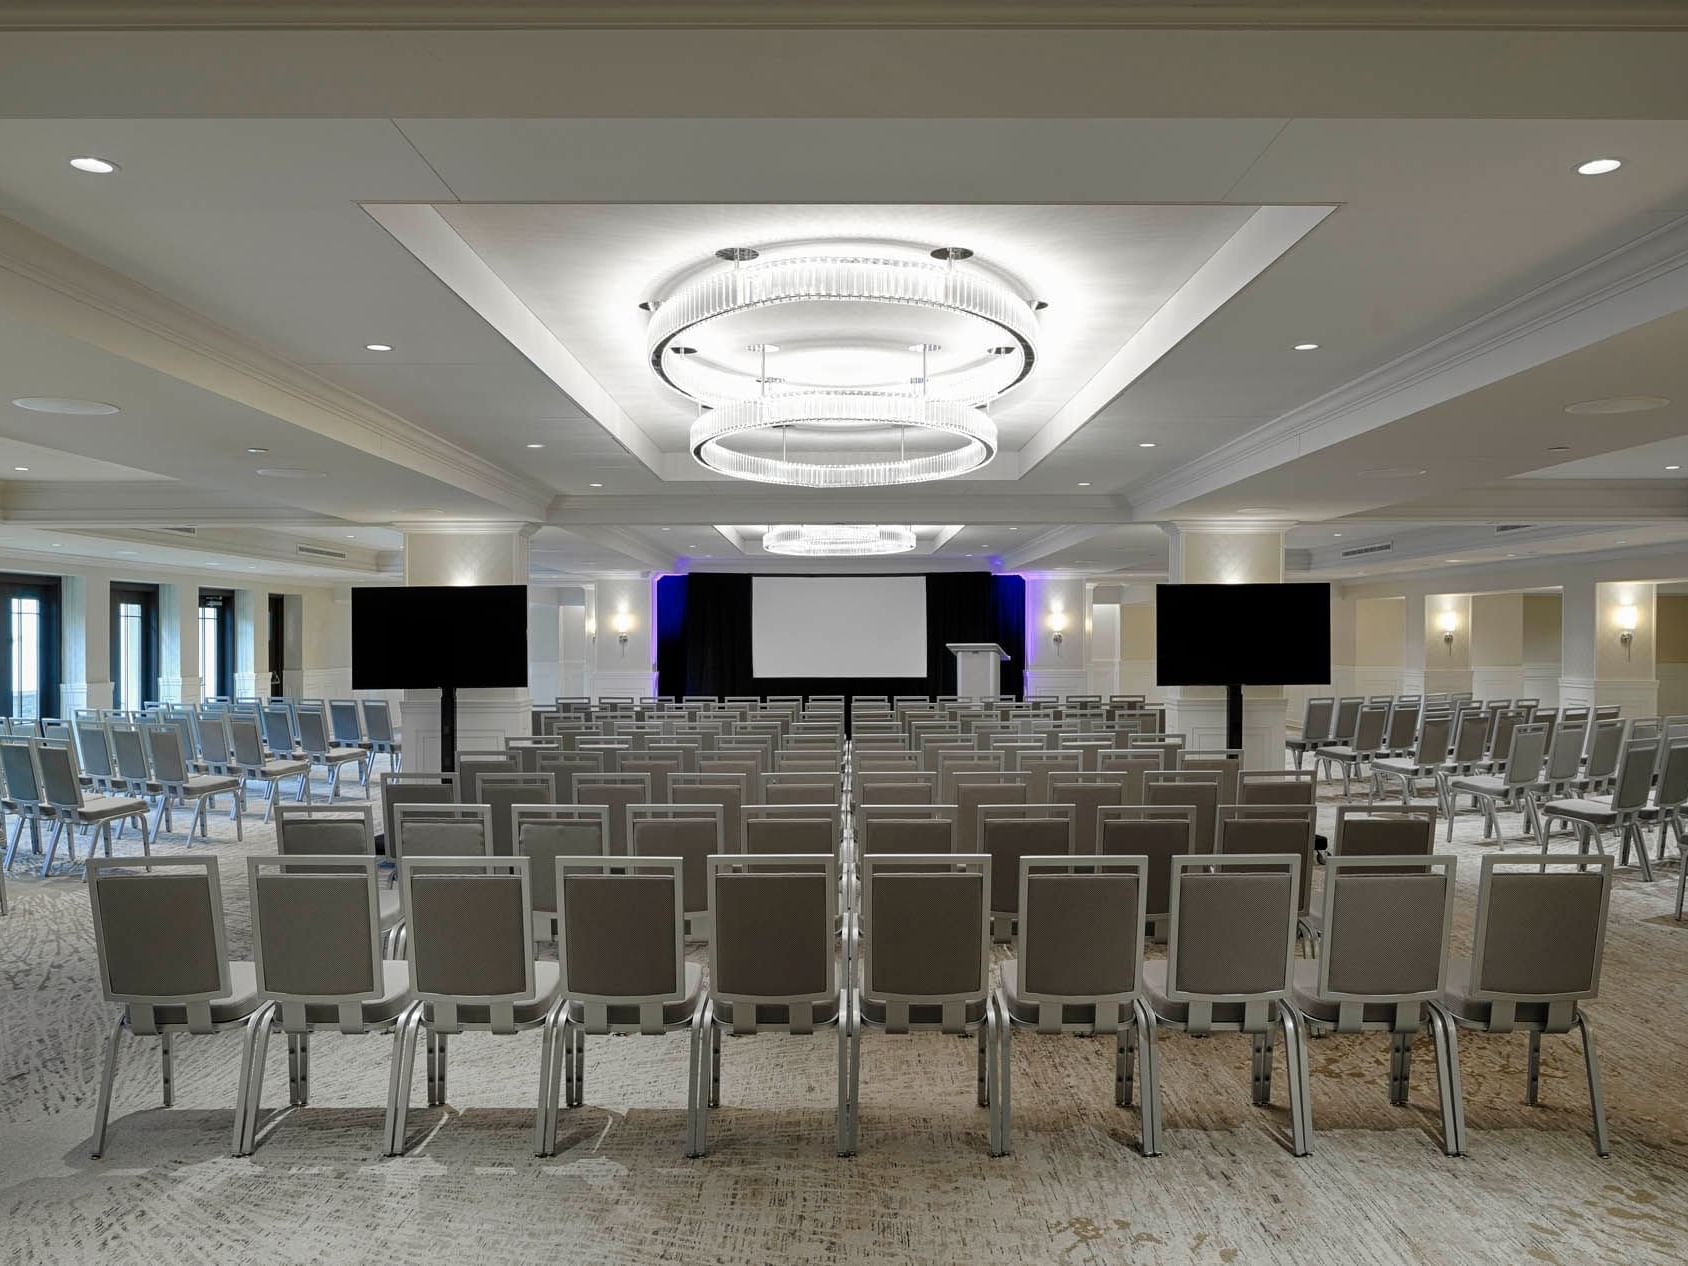 Classroom type meeting setup in an event hall at Kingsley